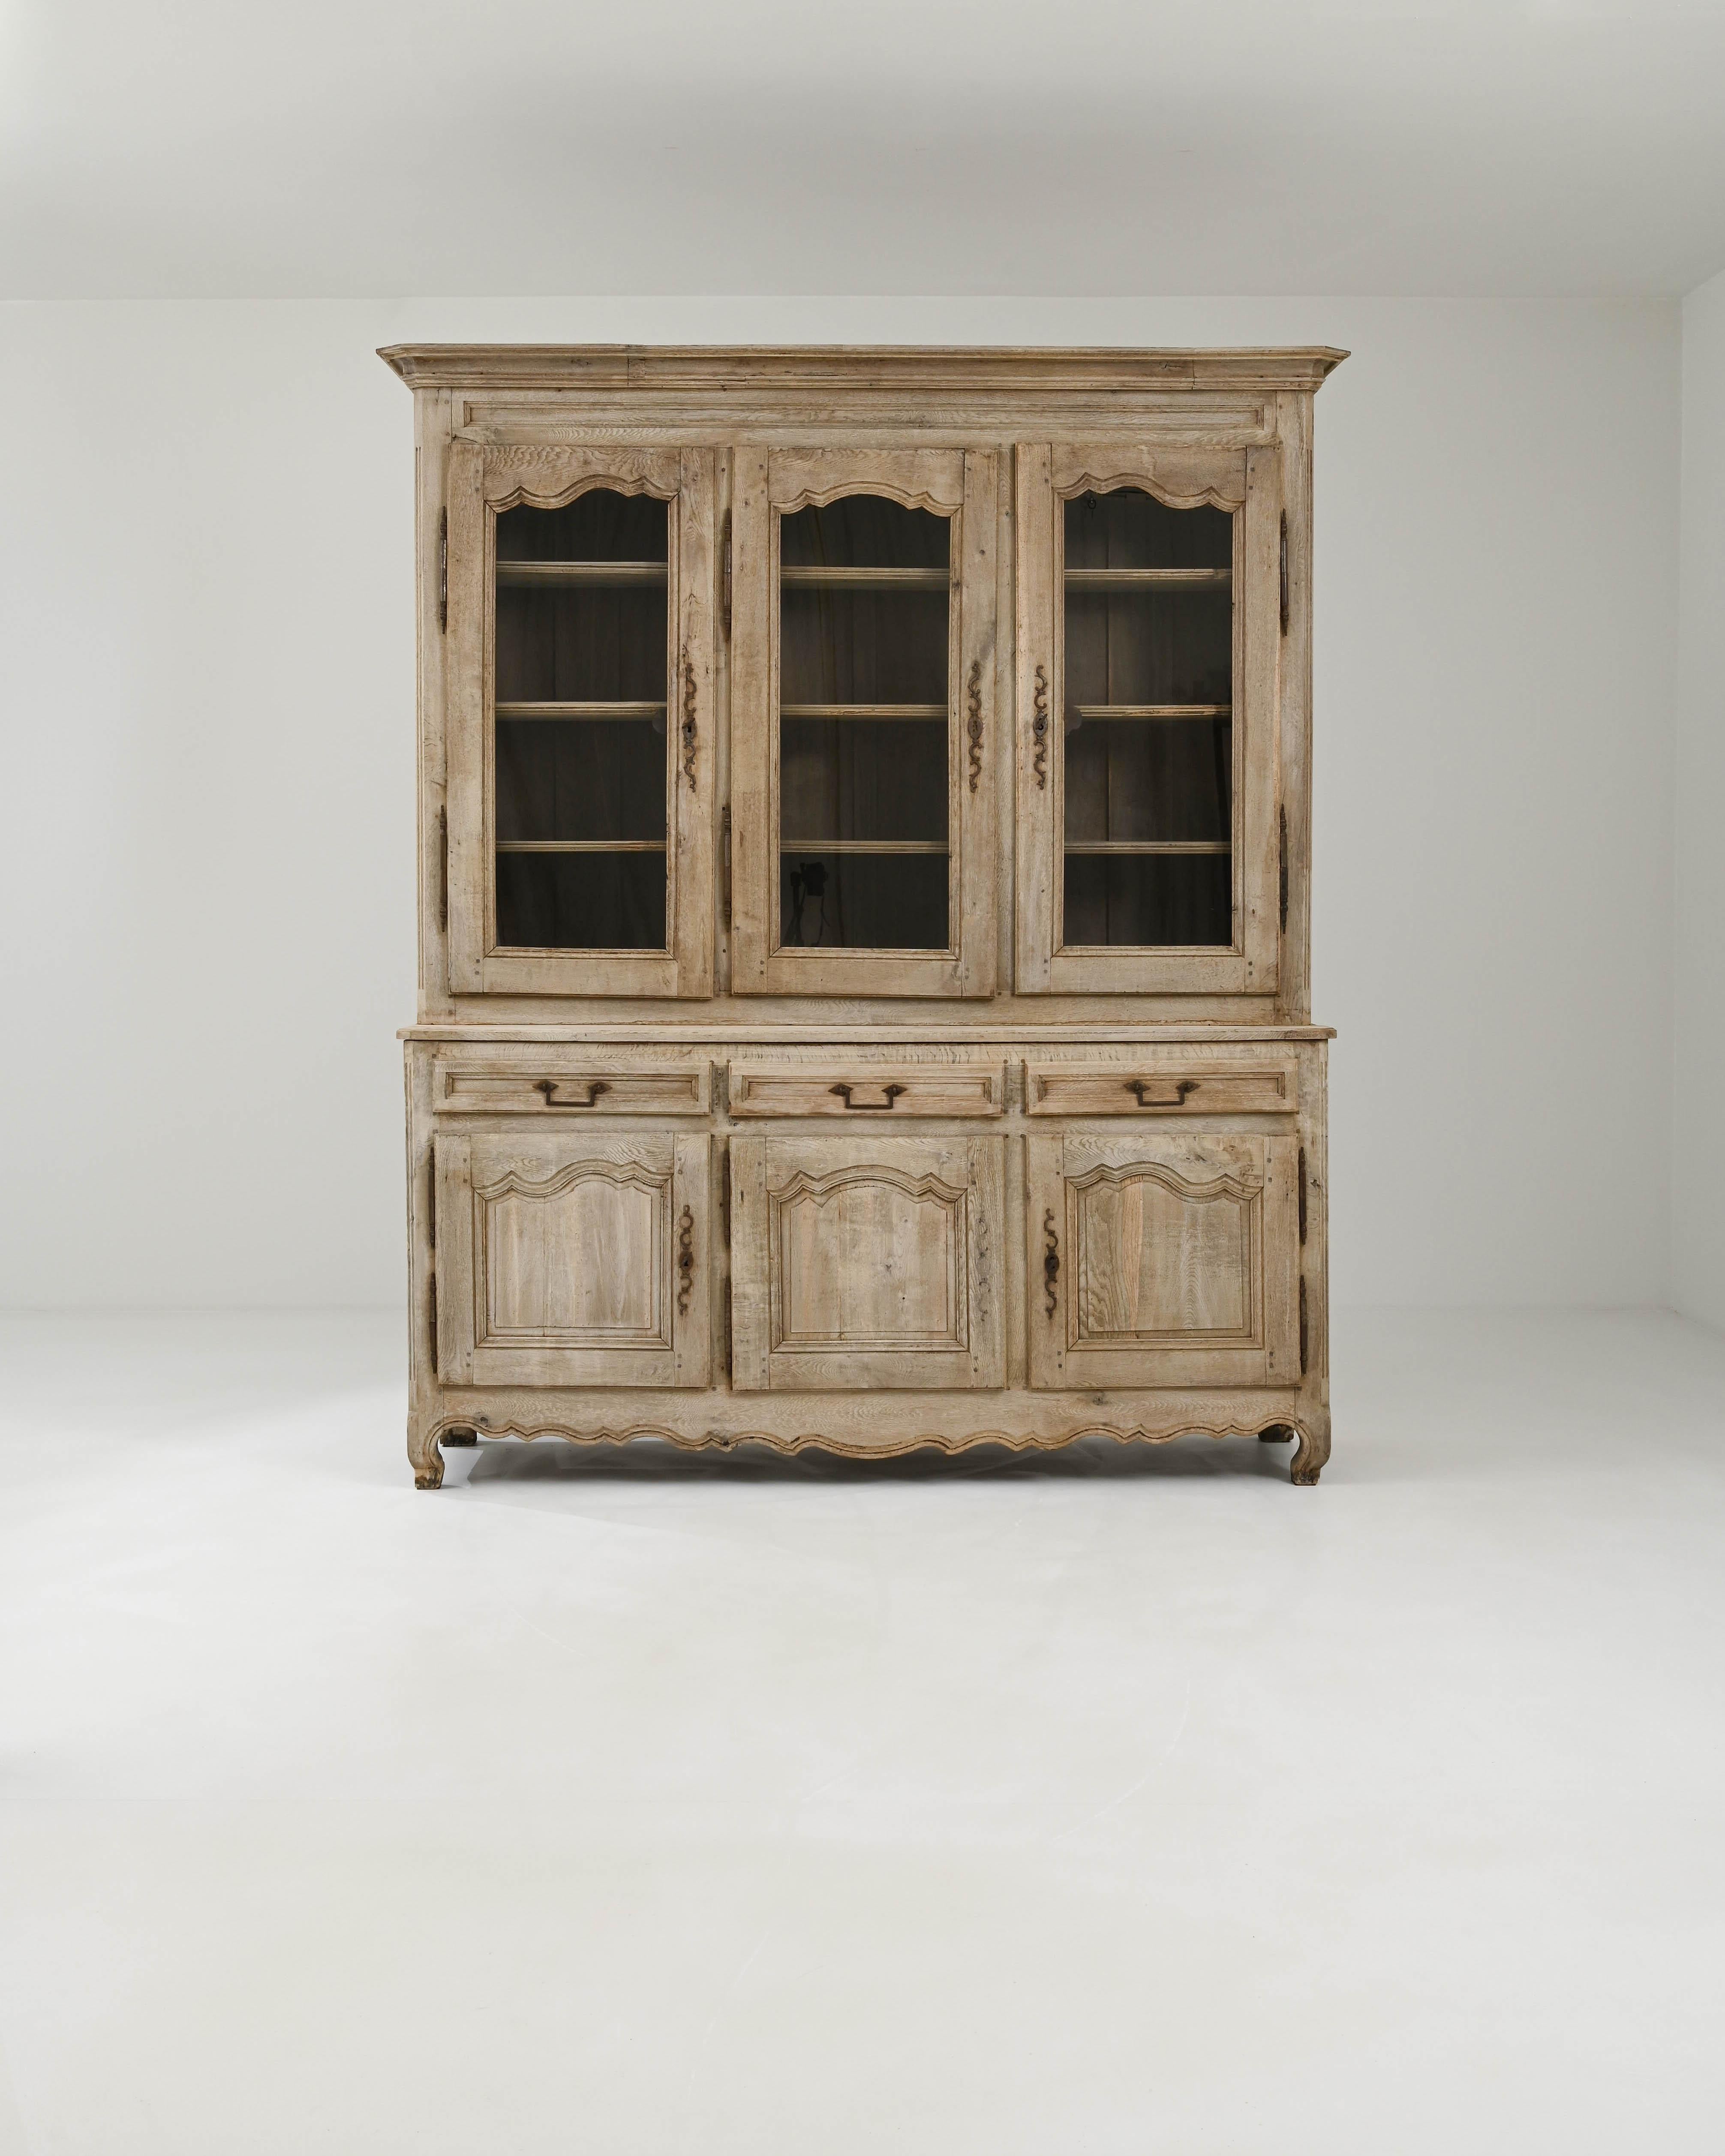 This antique oak vitrine would have originally been used to display the prized chinaware of a Provincial household. Built in France in the 1800s, the three windows of the upper cabinet give a view onto an array of shelves, gracefully accented by the